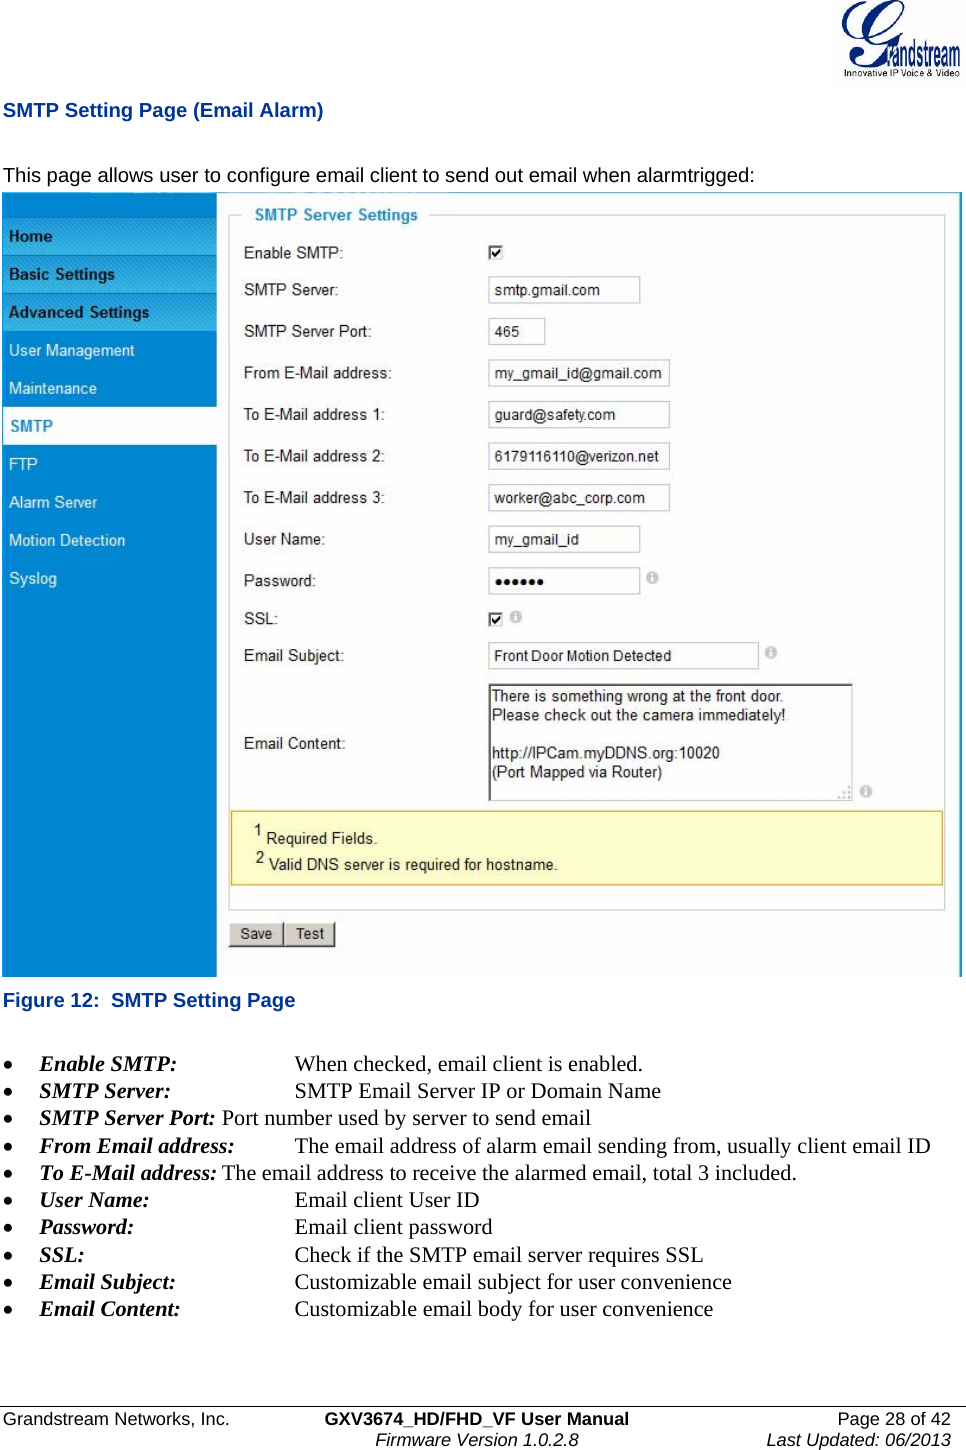  Grandstream Networks, Inc.  GXV3674_HD/FHD_VF User Manual  Page 28 of 42   Firmware Version 1.0.2.8  Last Updated: 06/2013  SMTP Setting Page (Email Alarm)  This page allows user to configure email client to send out email when alarmtrigged:  Figure 12:  SMTP Setting Page  • Enable SMTP:     When checked, email client is enabled. • SMTP Server:    SMTP Email Server IP or Domain Name • SMTP Server Port: Port number used by server to send email • From Email address:  The email address of alarm email sending from, usually client email ID • To E-Mail address: The email address to receive the alarmed email, total 3 included.  • User Name:    Email client User ID • Password:      Email client password • SSL:      Check if the SMTP email server requires SSL • Email Subject:    Customizable email subject for user convenience • Email Content:    Customizable email body for user convenience   